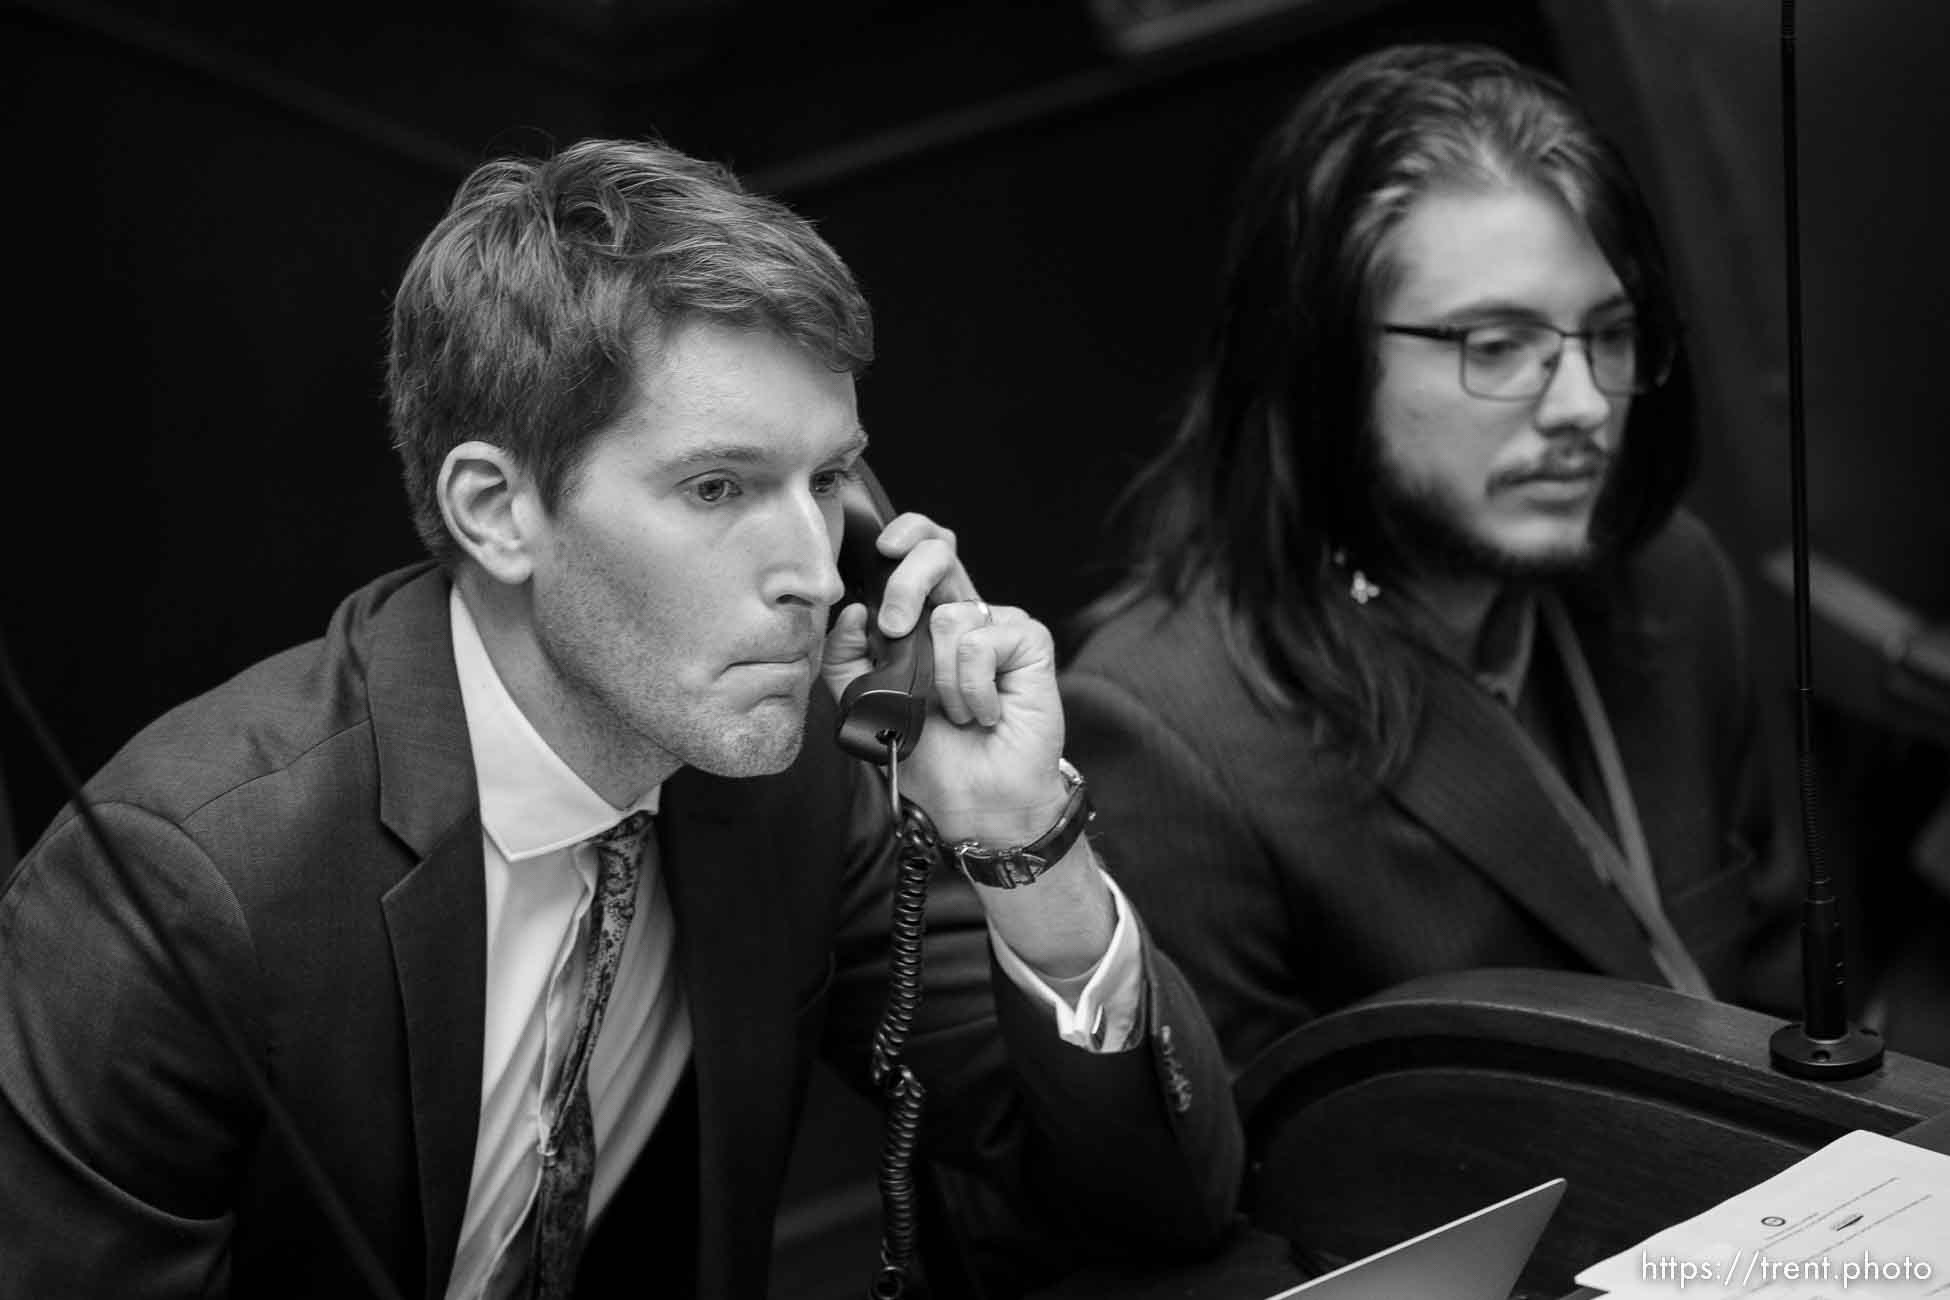 Sen. Nate Blouin and intern Ari Webb as the Senate gives final passage to a bill aiming to crack down on the ability of doctors to prescribe hormone therapy for minors who are transgender.